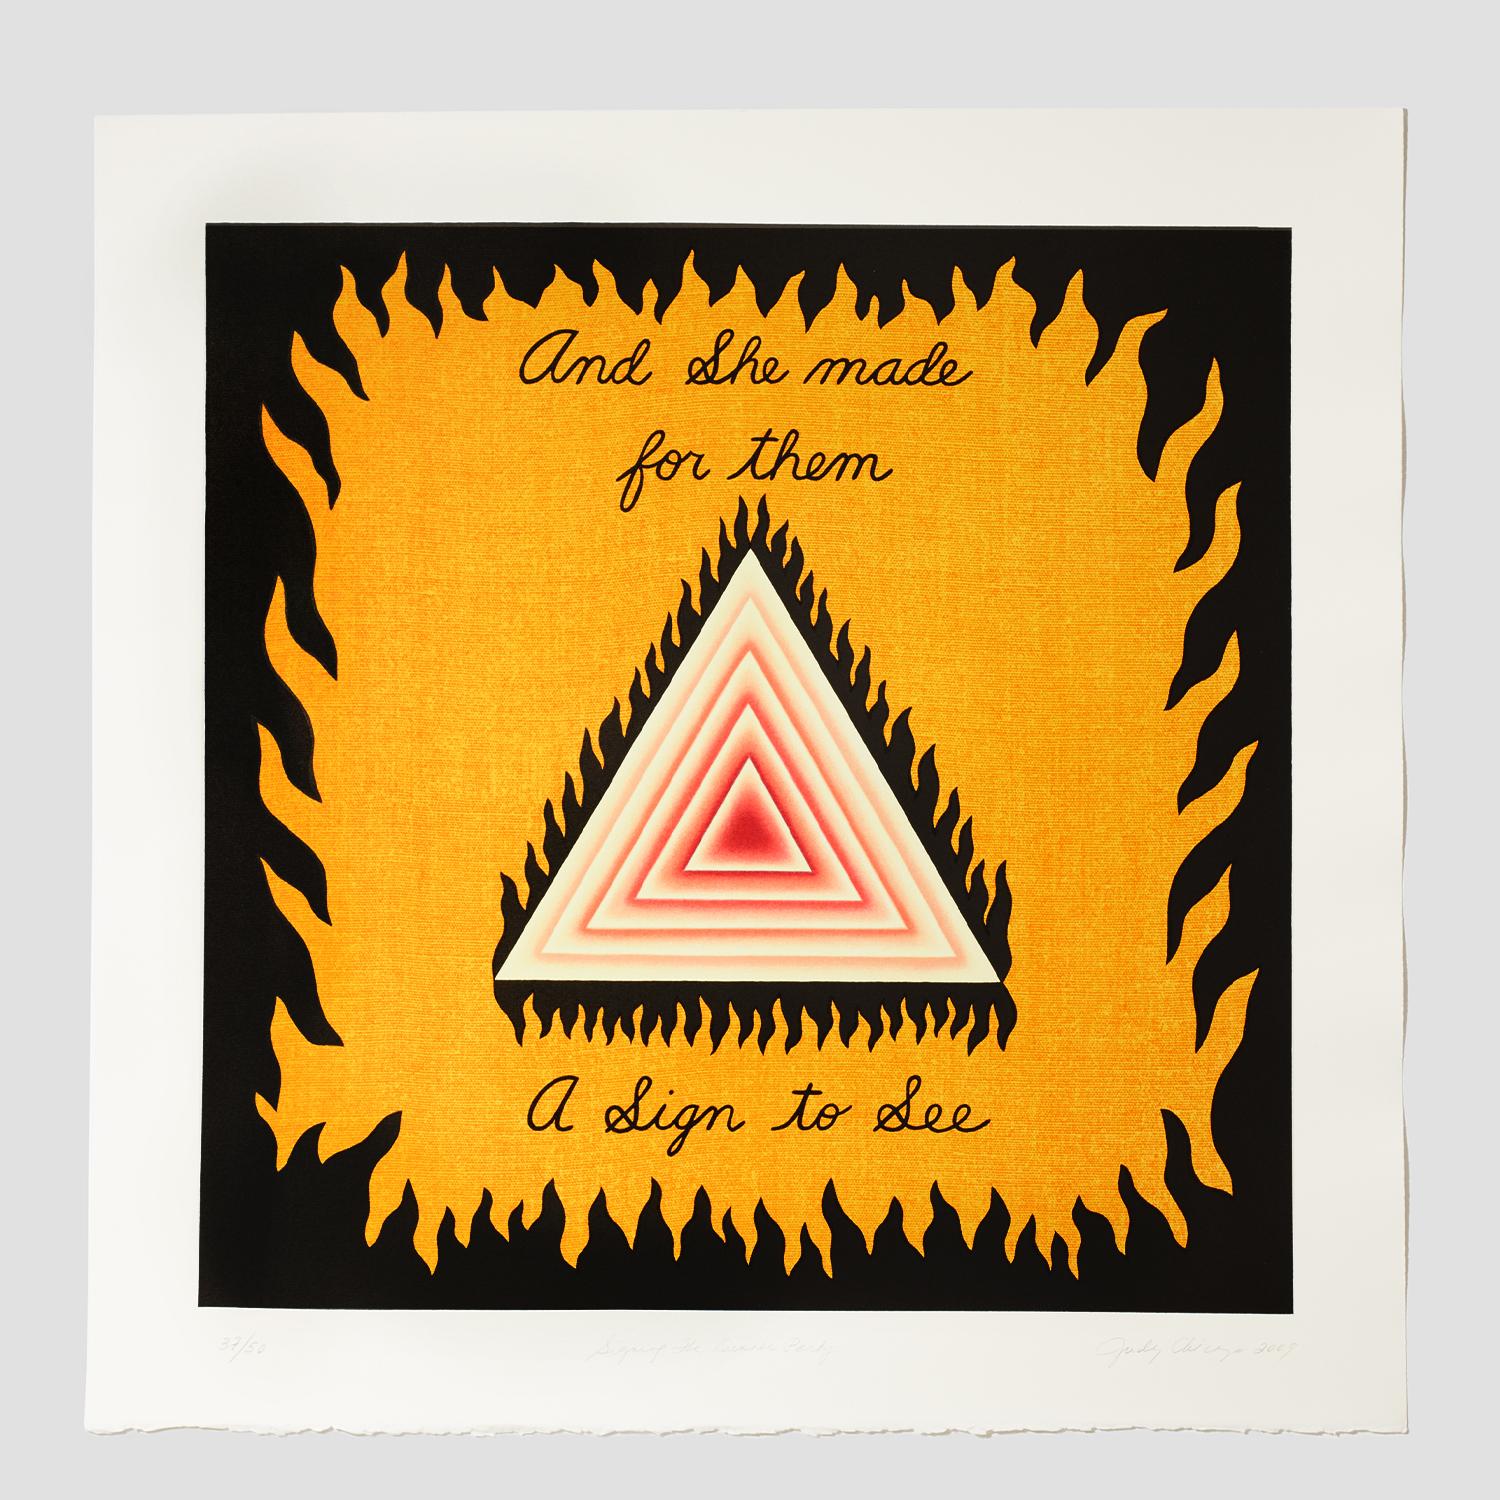 Signing the Dinner Party - Print by Judy Chicago